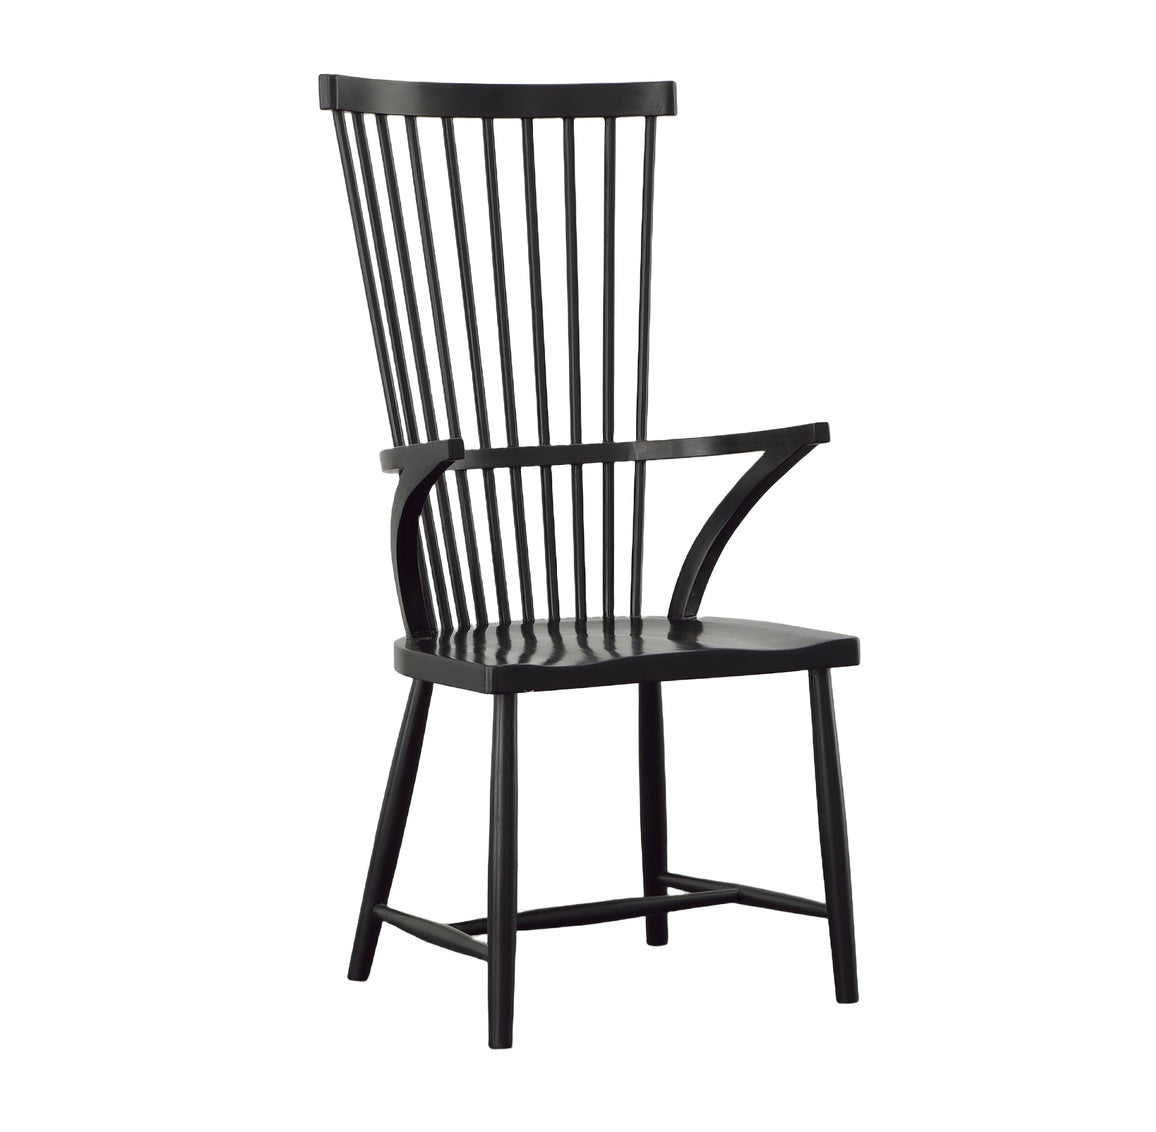 Antique Style High Back Dining Chair, Black Windsor dining chair for sale